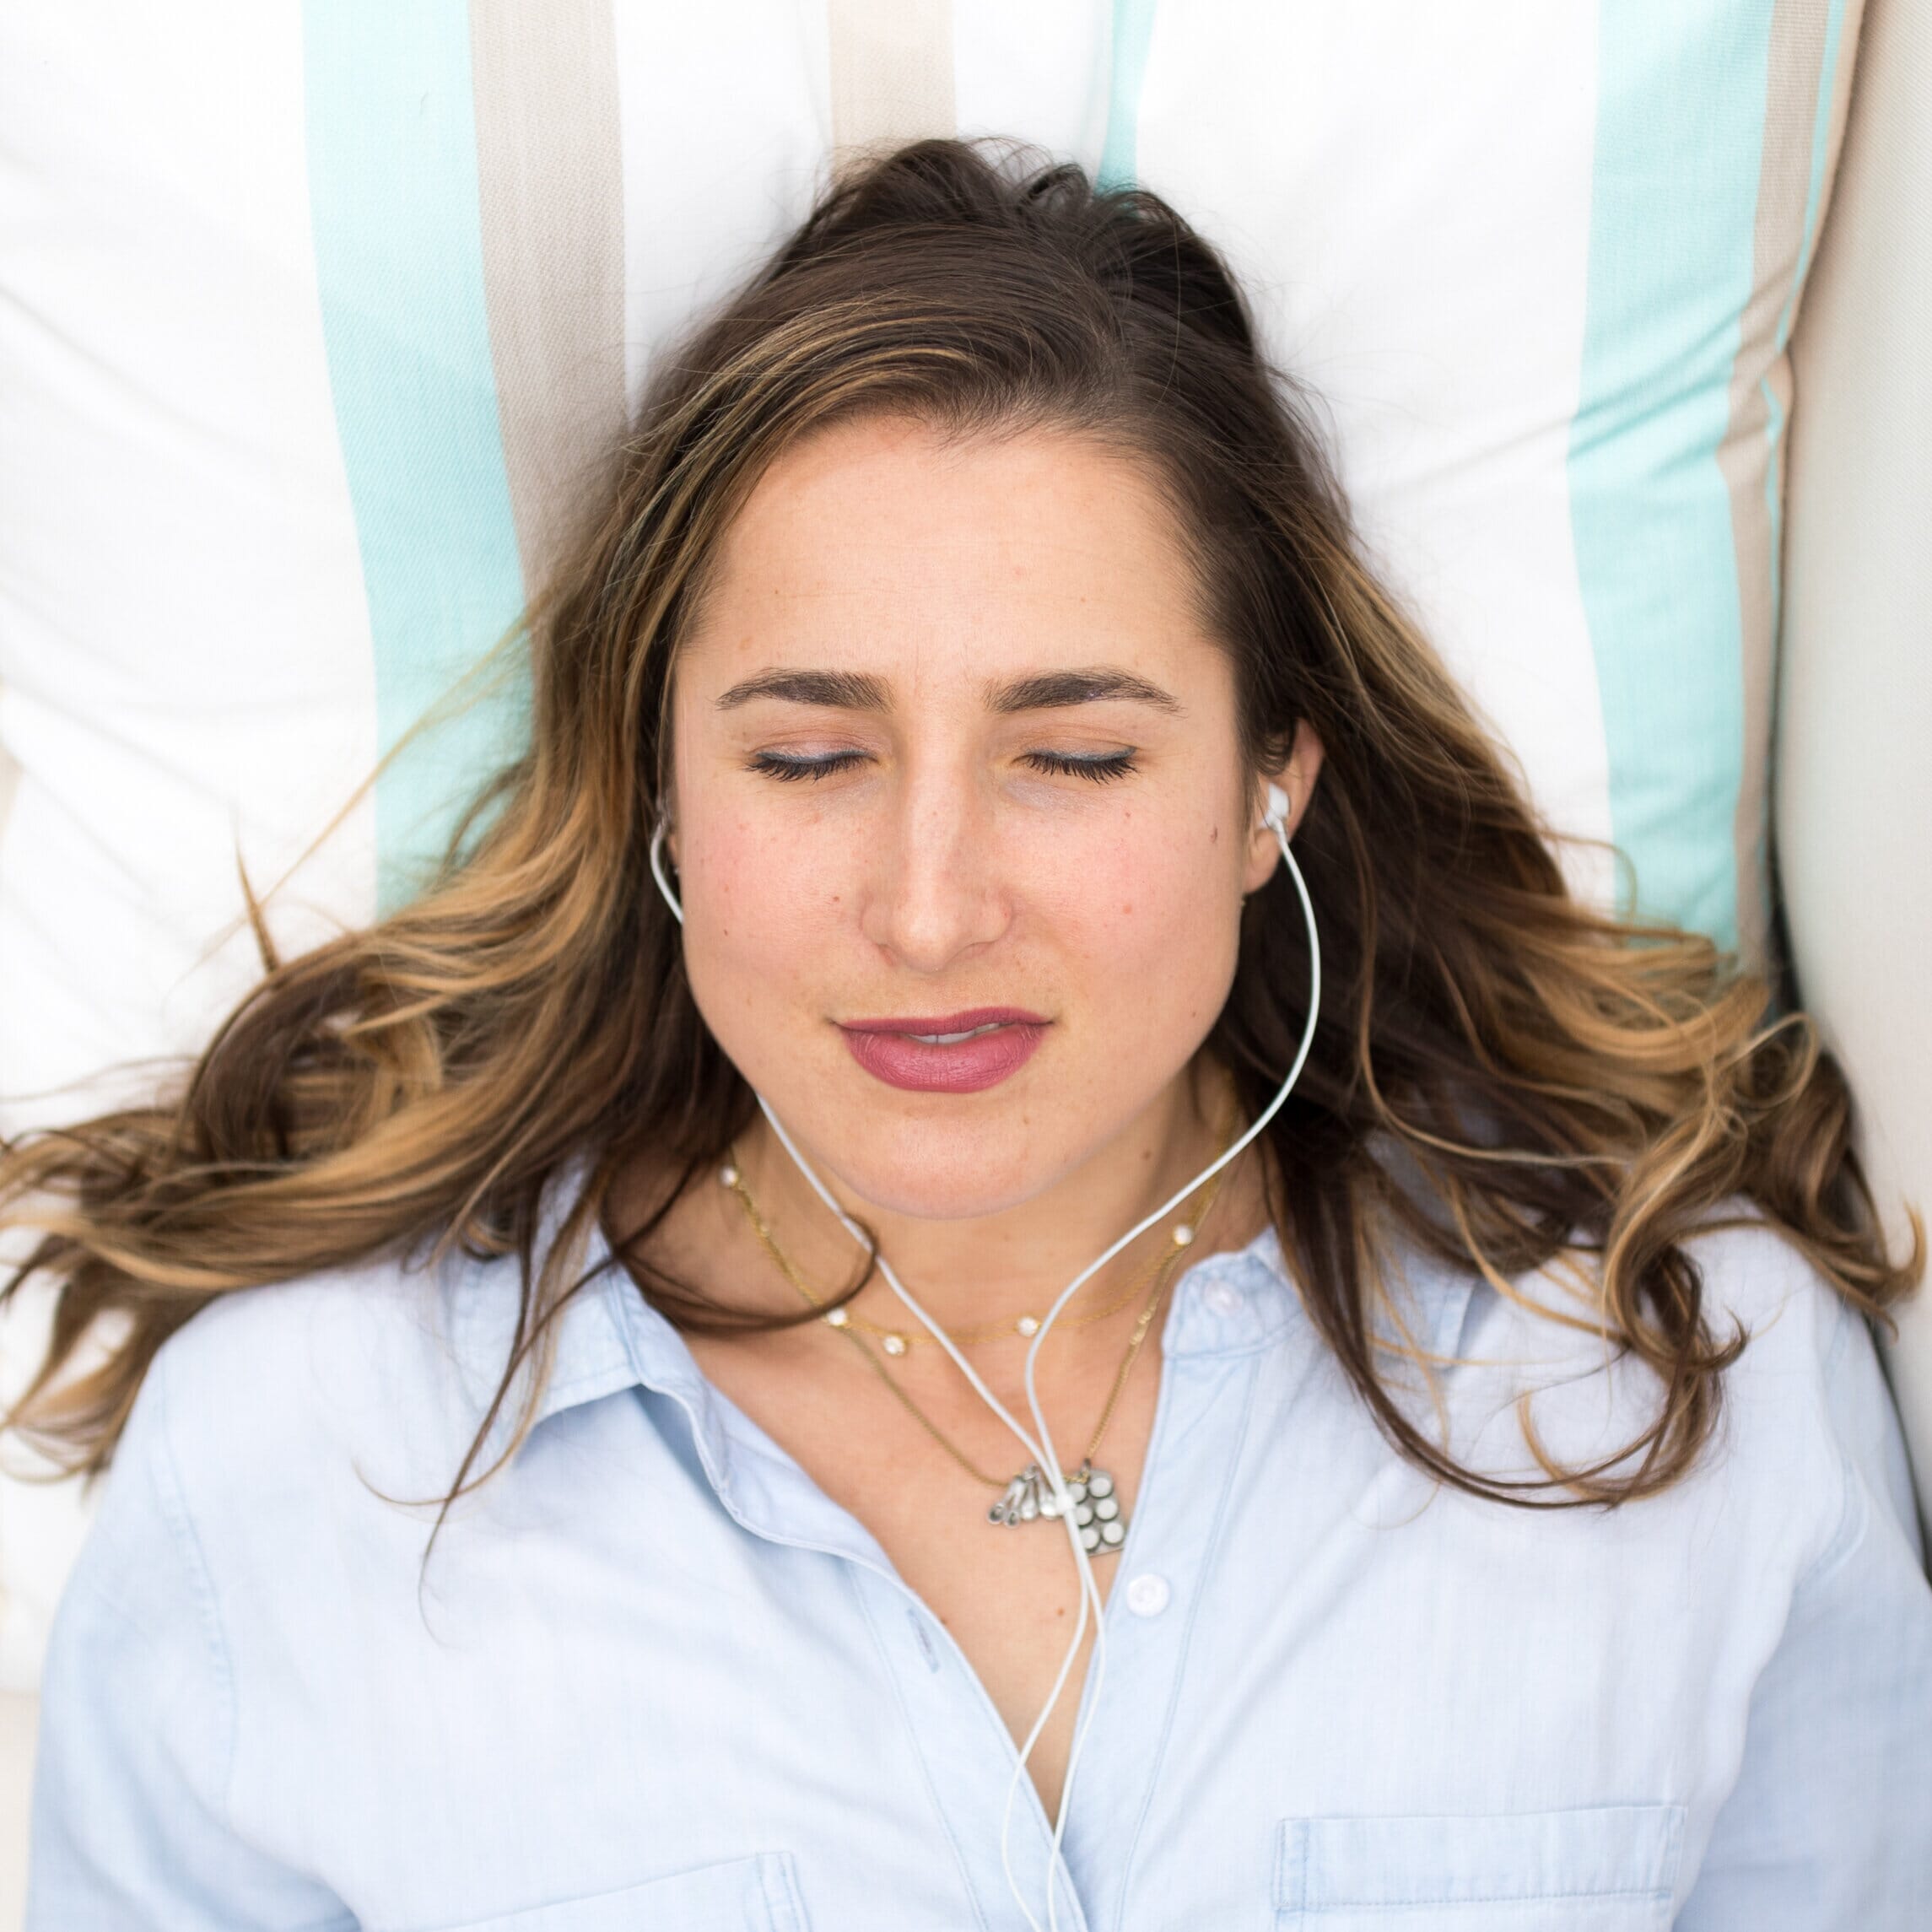 woman meditating with her eyes closed and earphones in